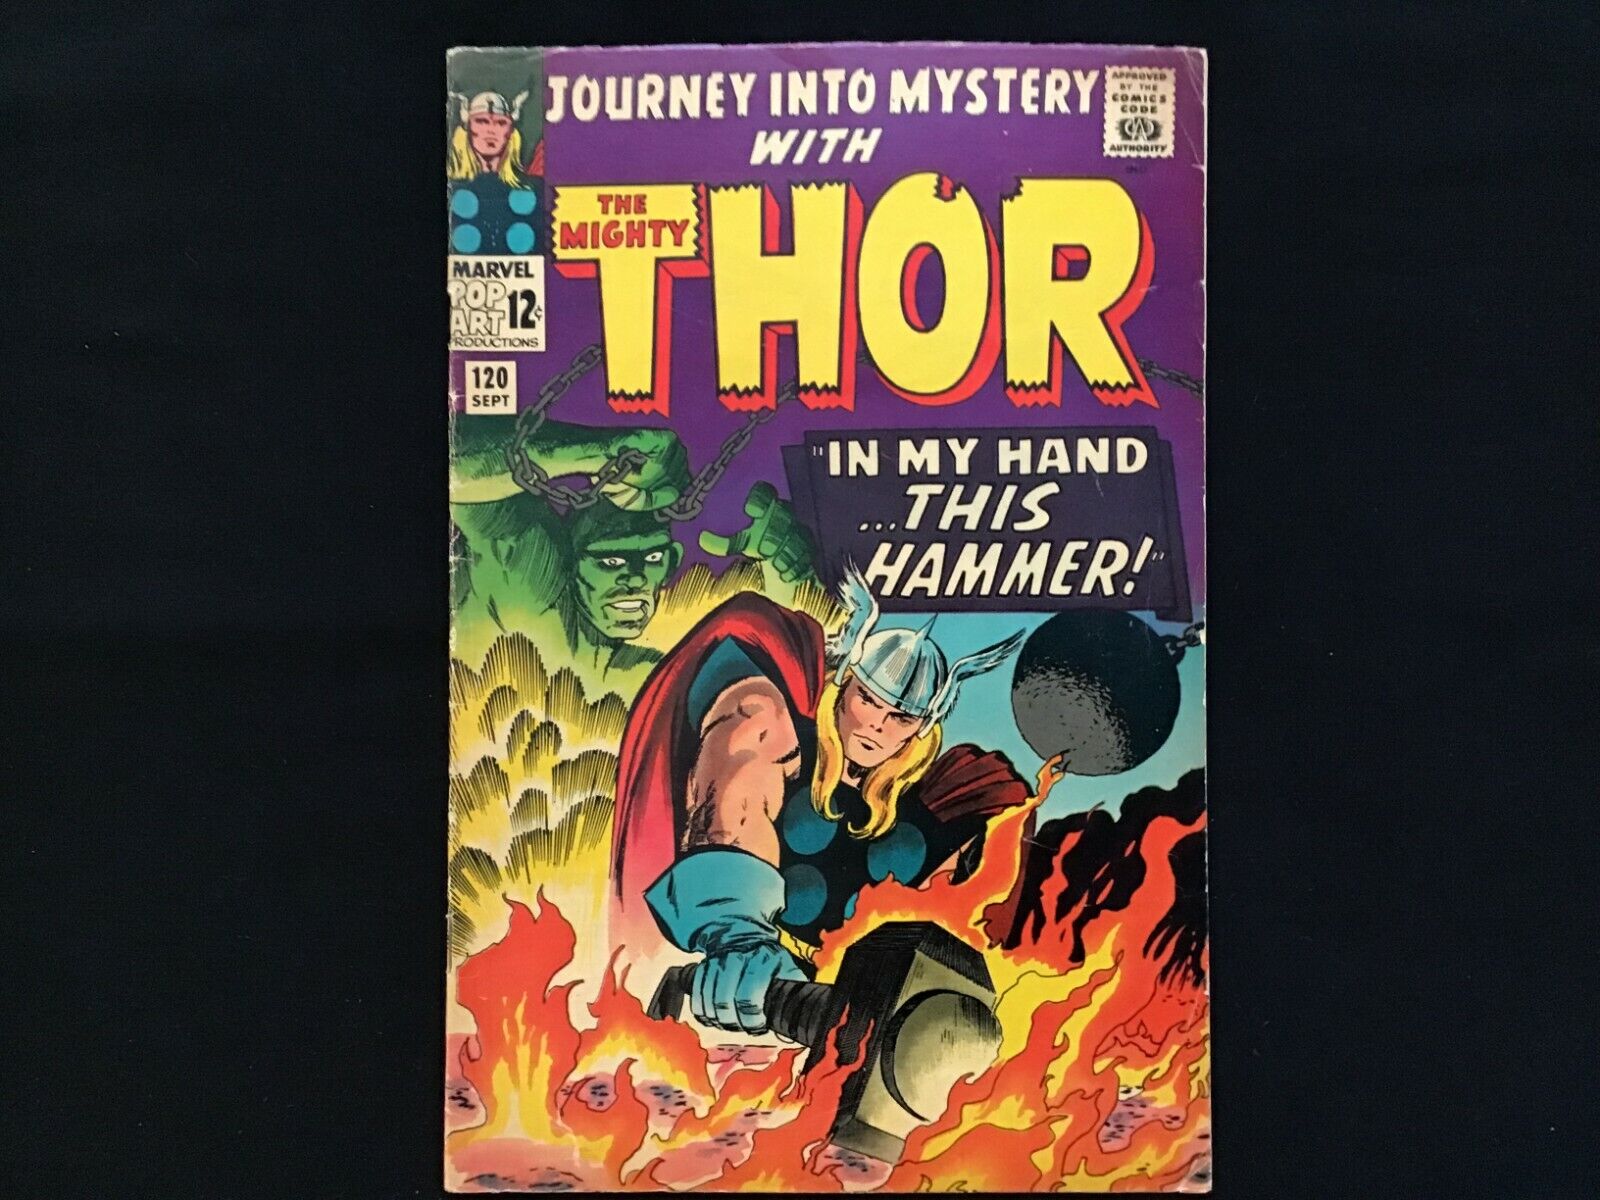 JOURNEY INTO MYSTERY THOR #120 Lot of 1 Marvel Comic Book